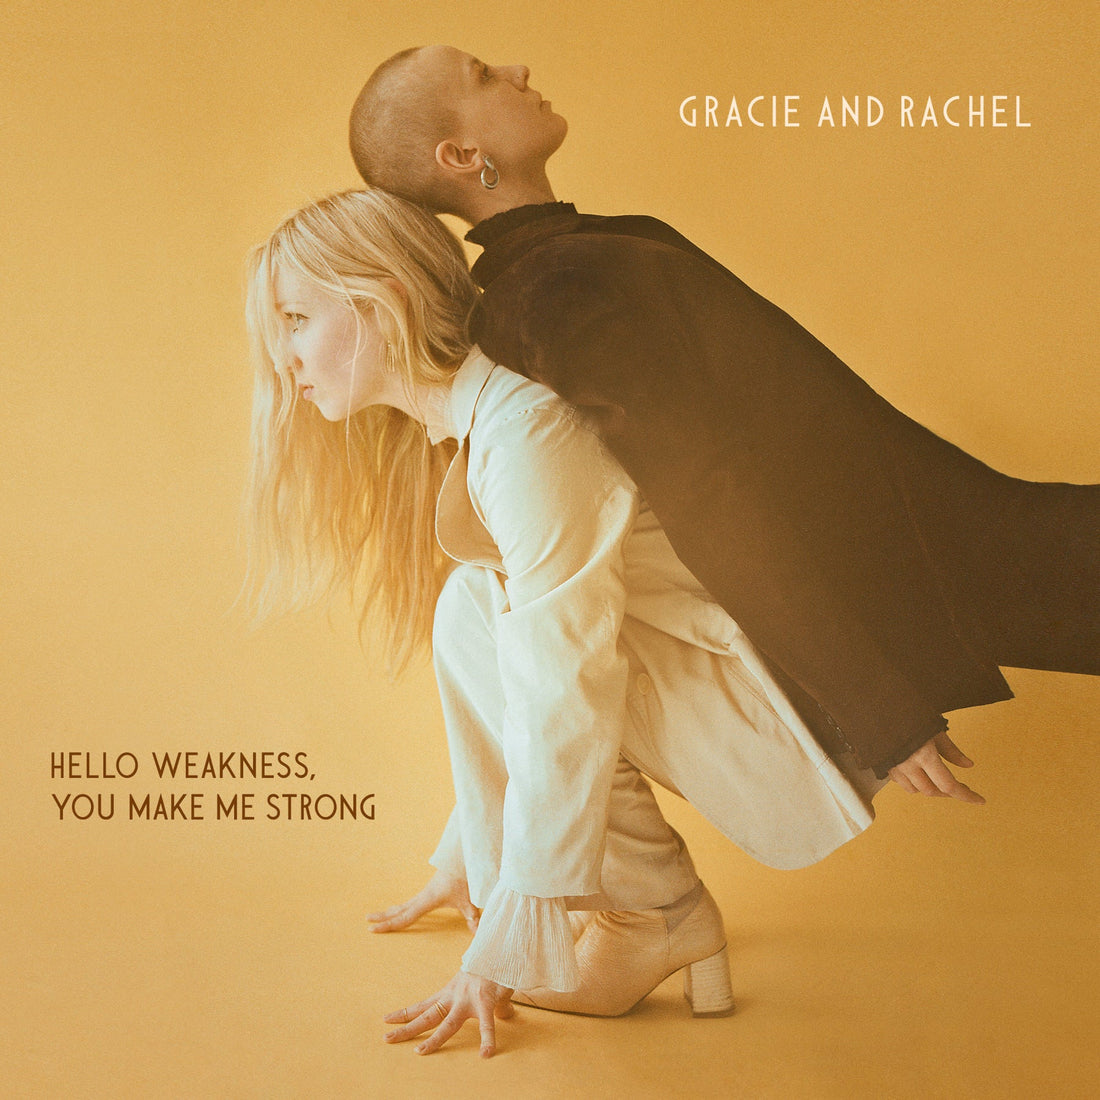 Gracie and Rachel's new album now available for pre-order